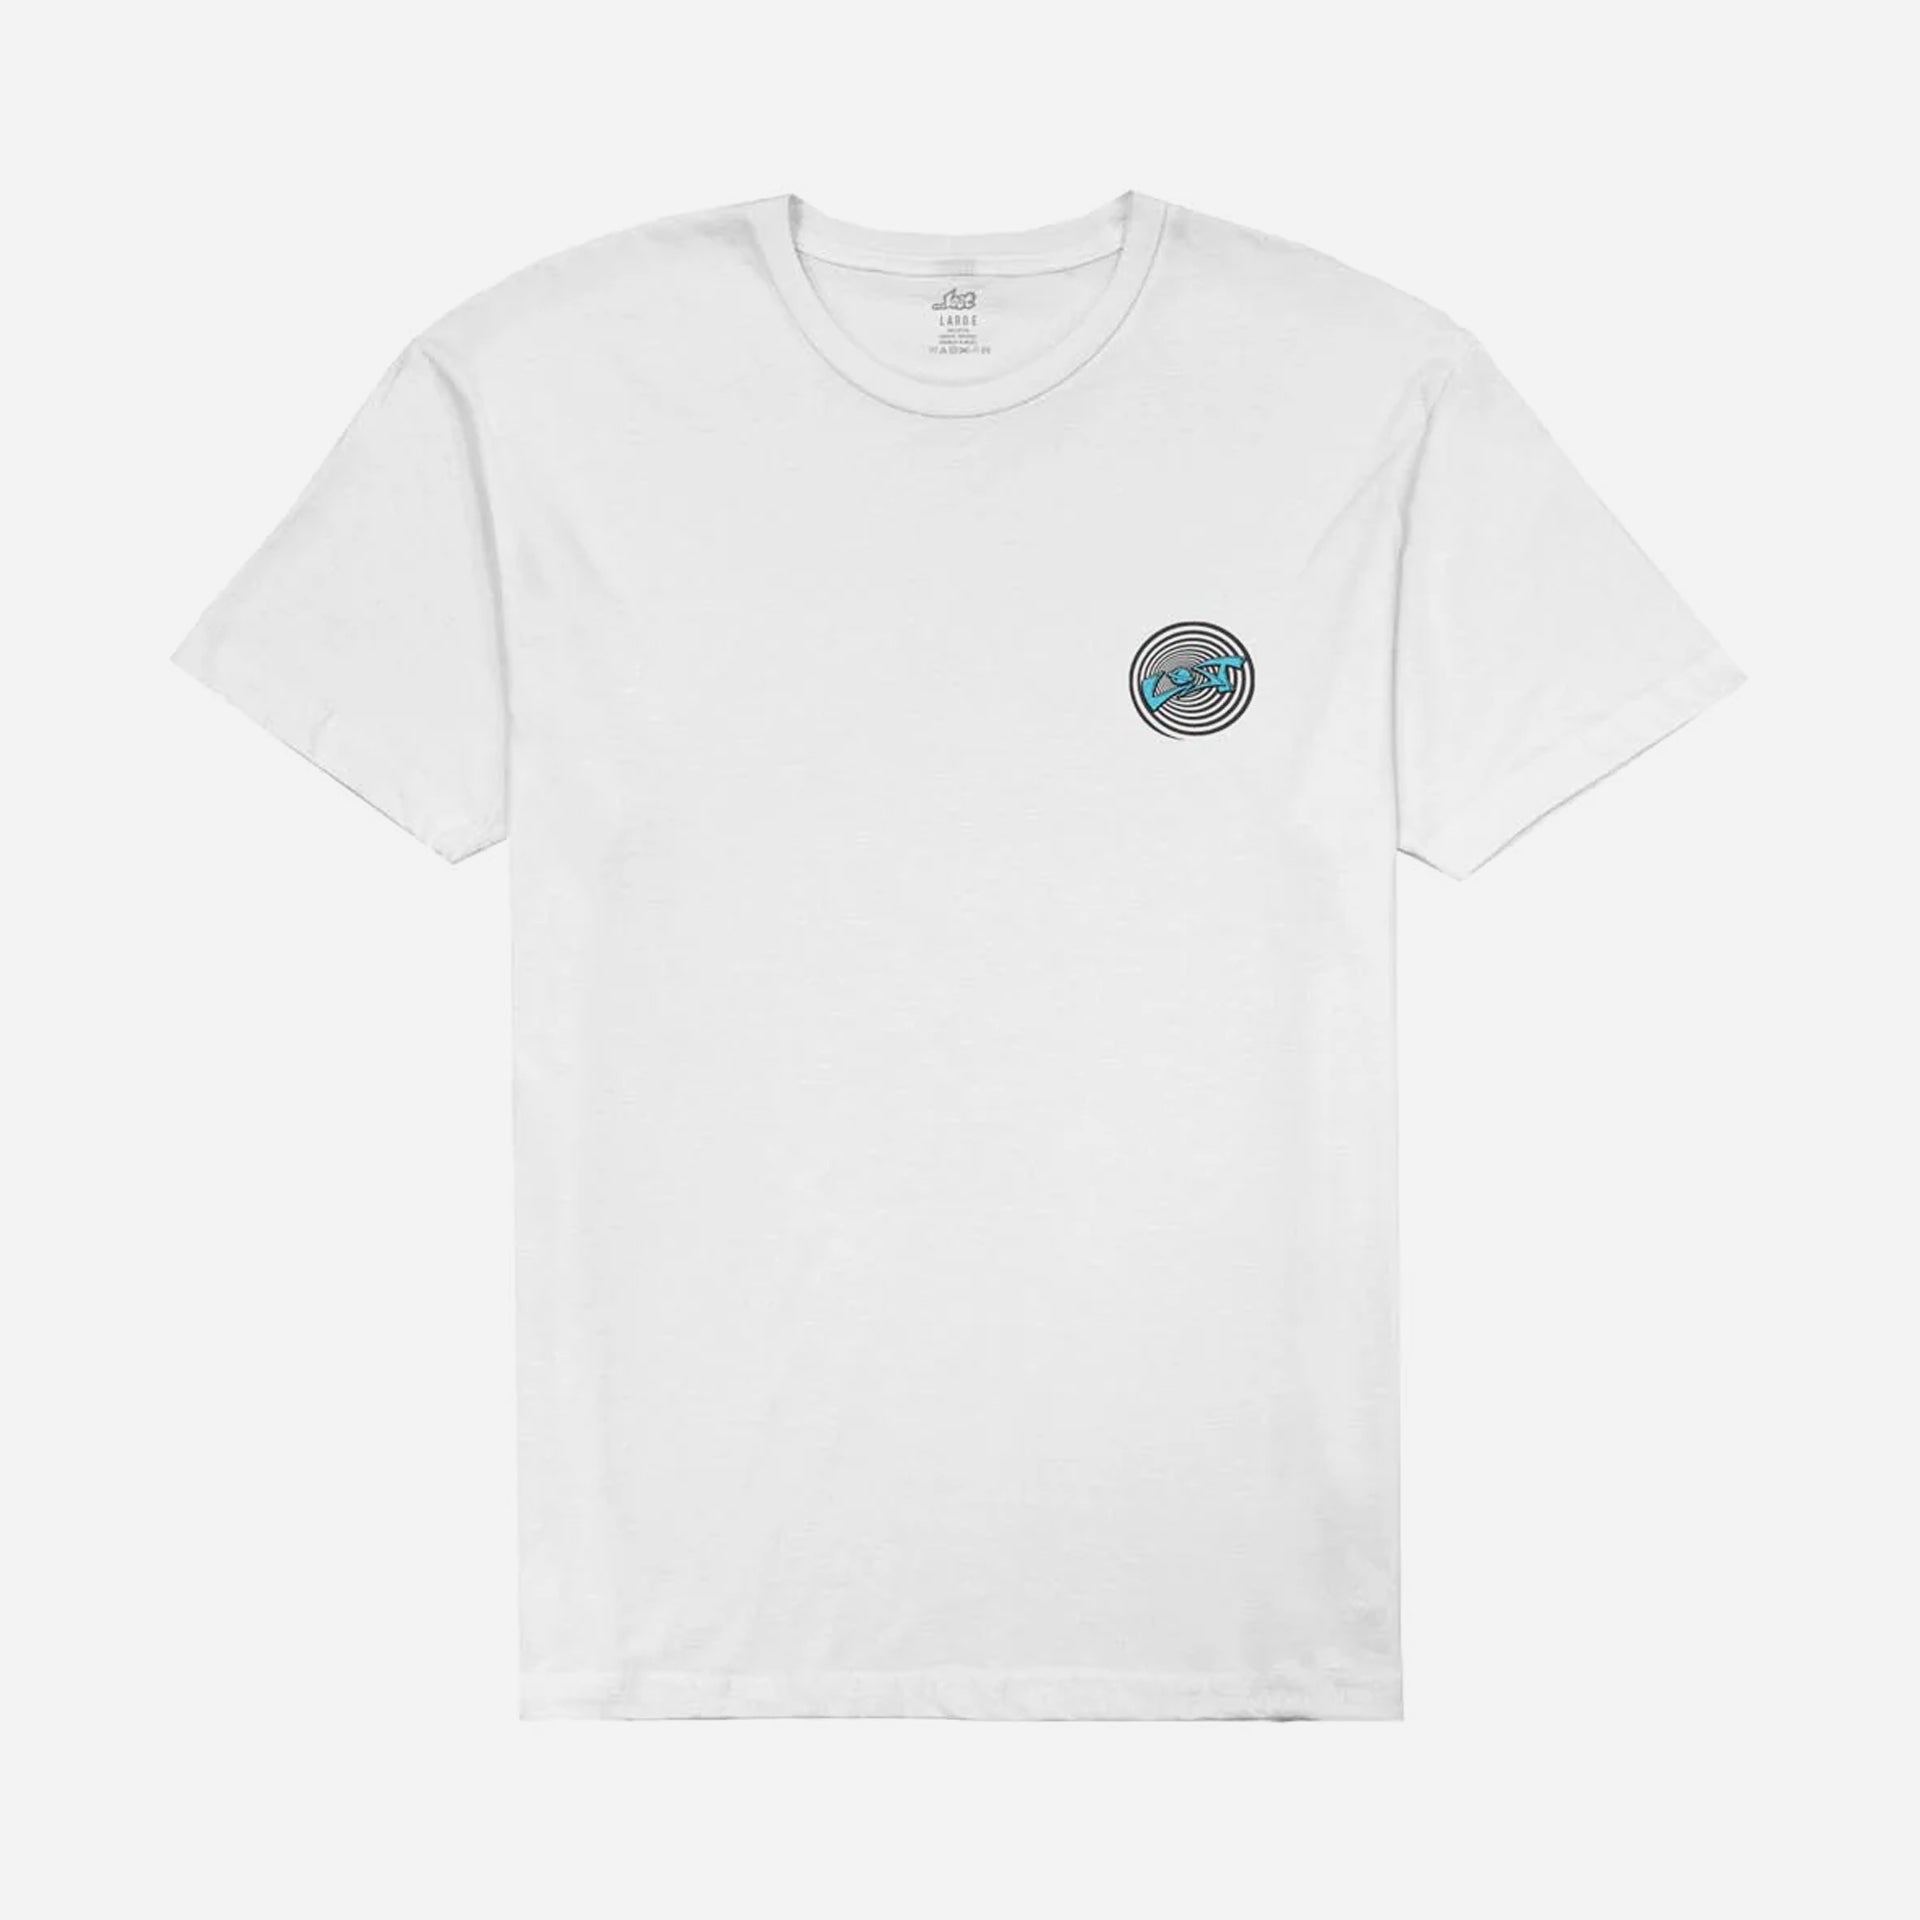 Lost Mens Surfboards T-Shirt - White